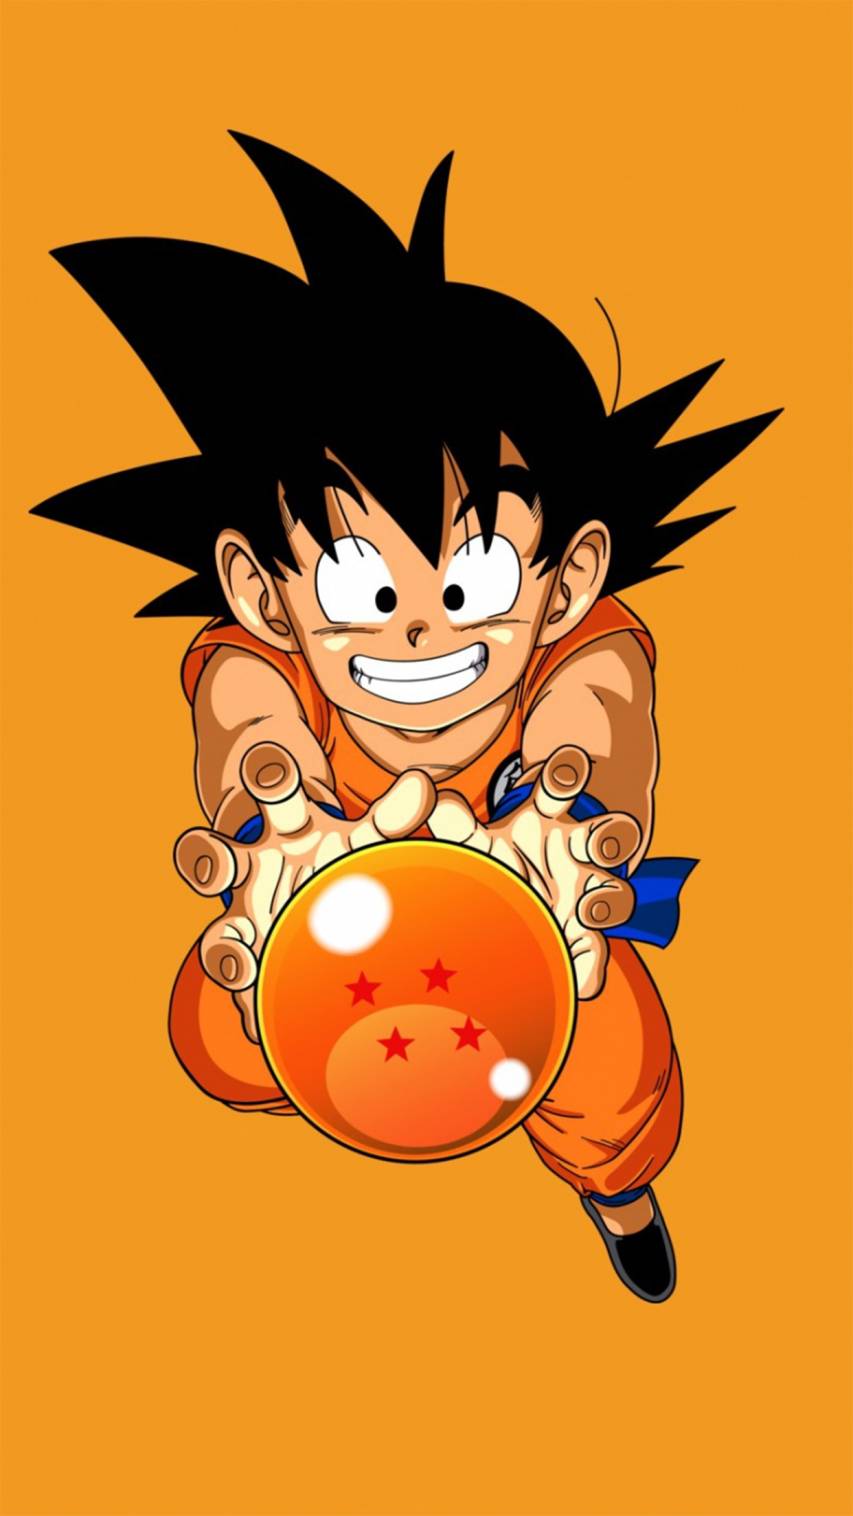 Cute Dragon Ball image Backgrounds for iPhone